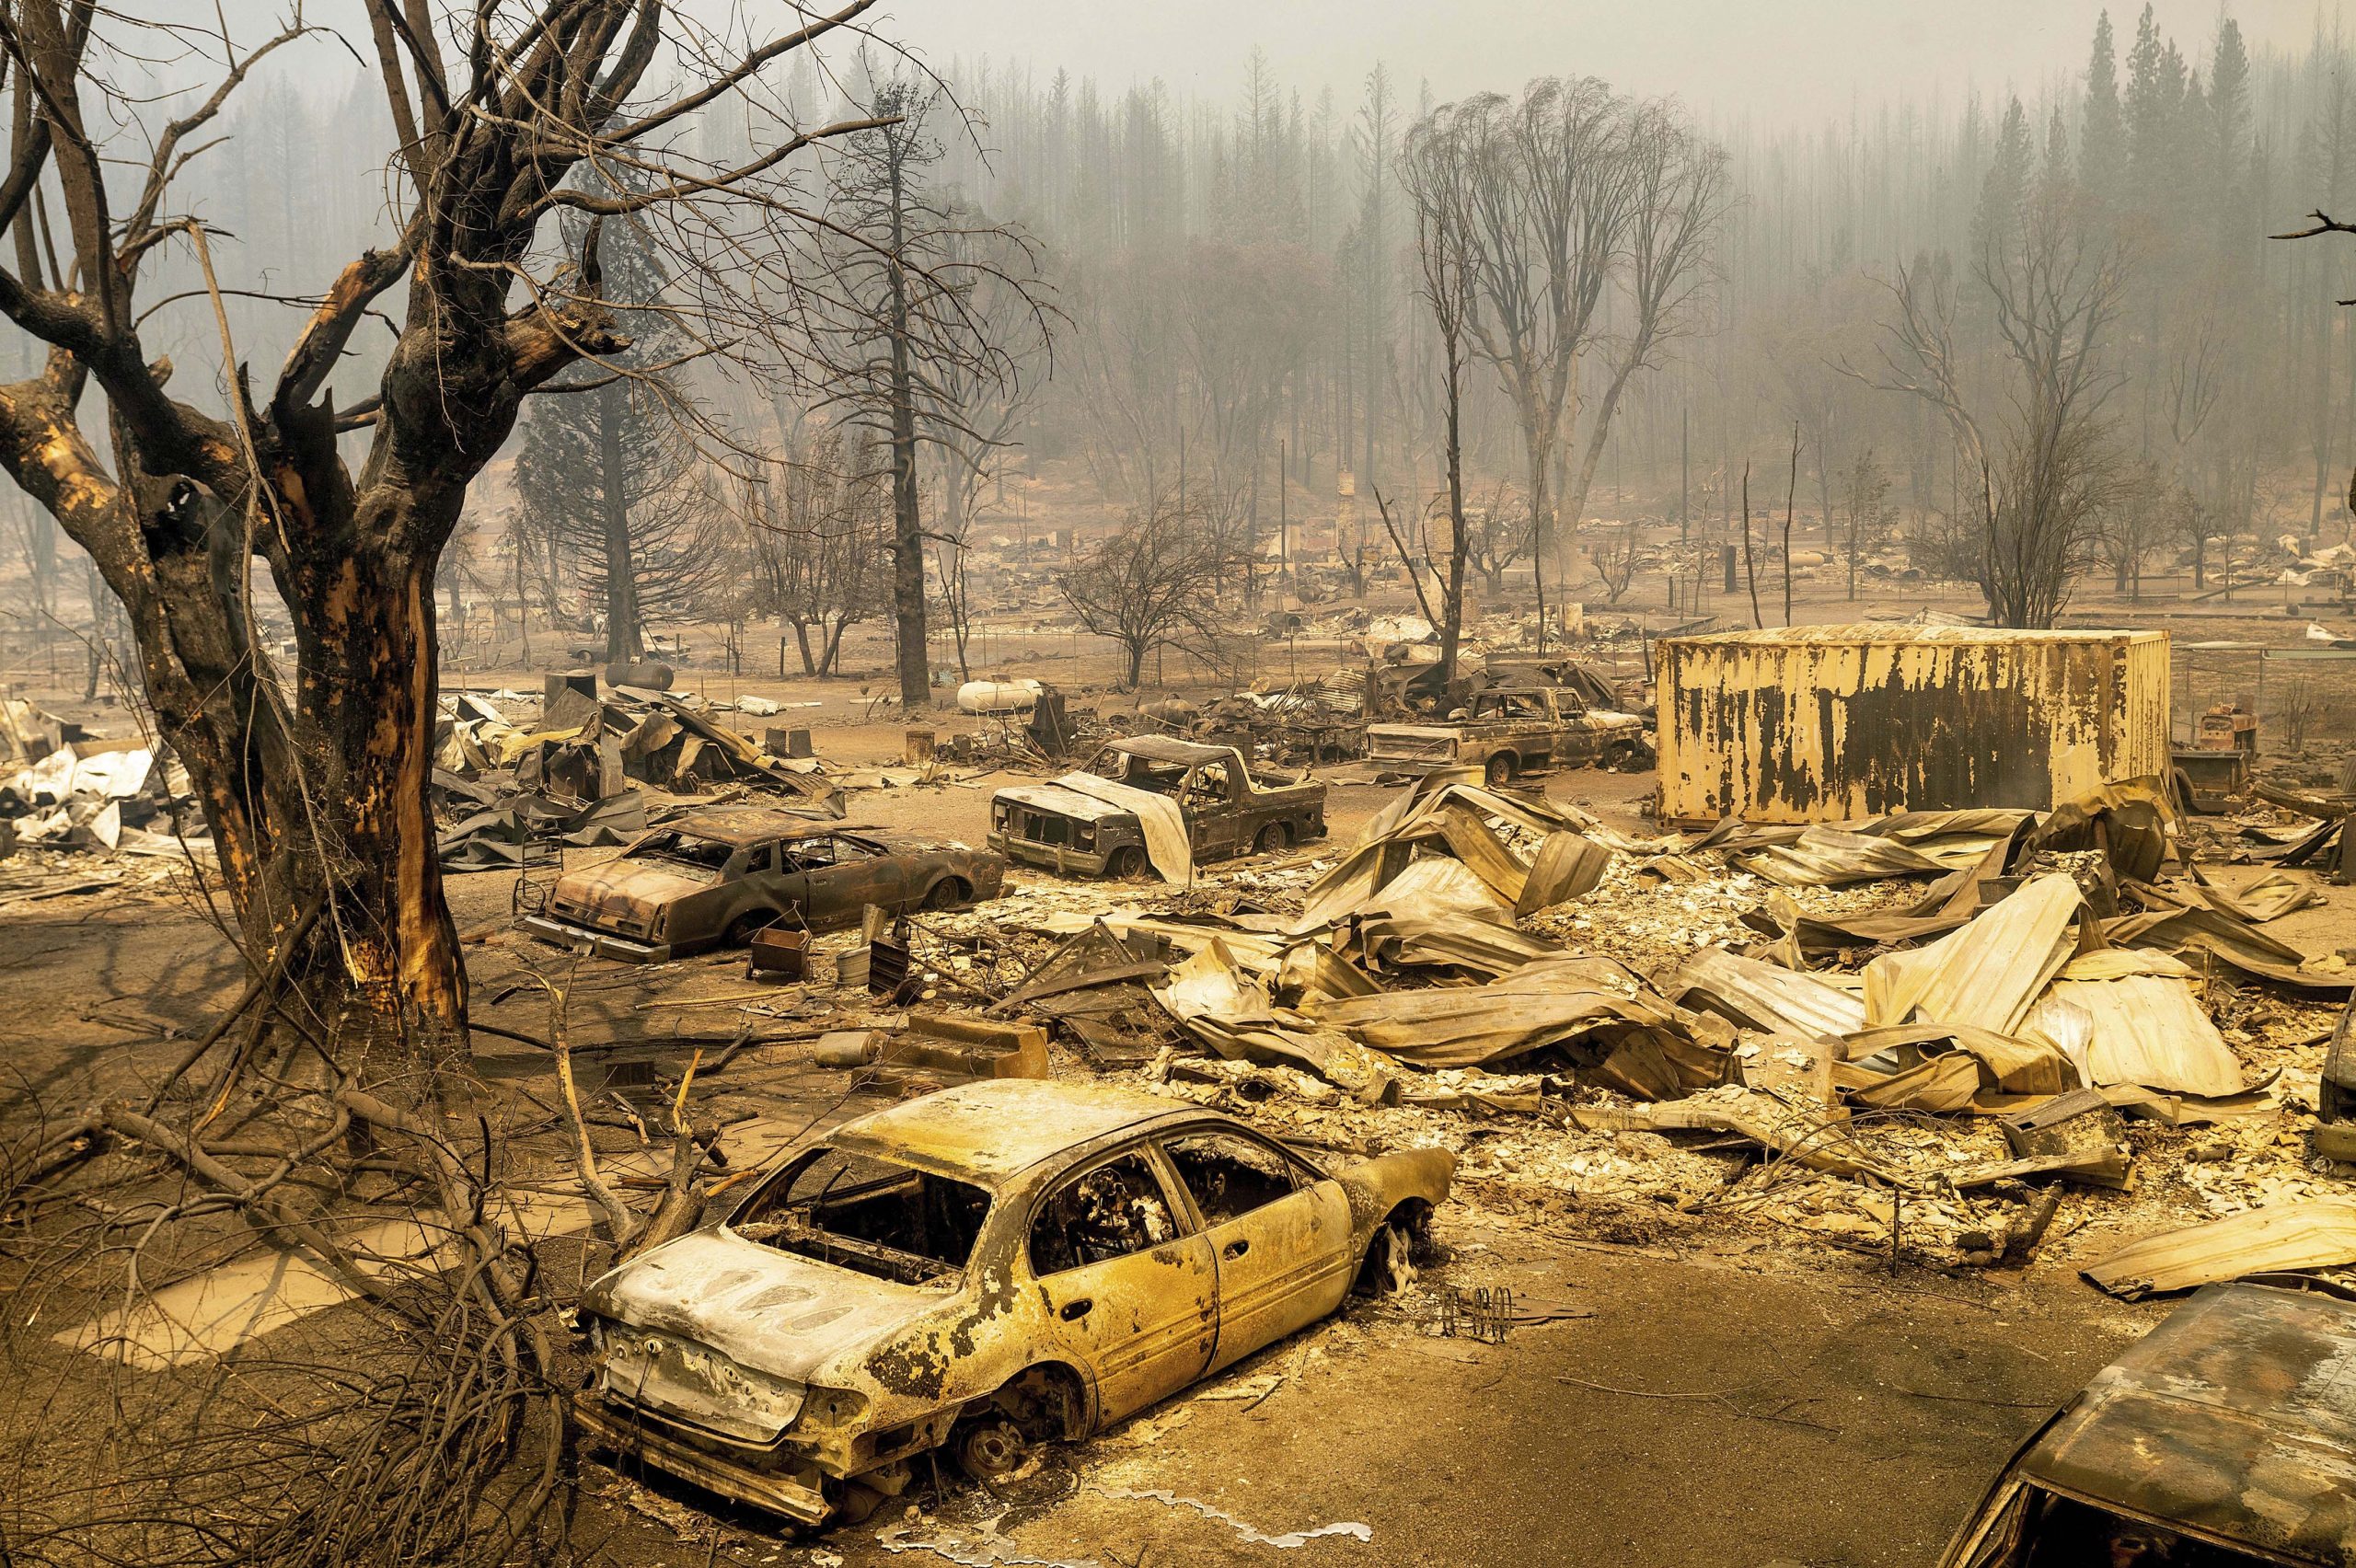 Dixie wildfire: At least 8 people missing in California, authorities say